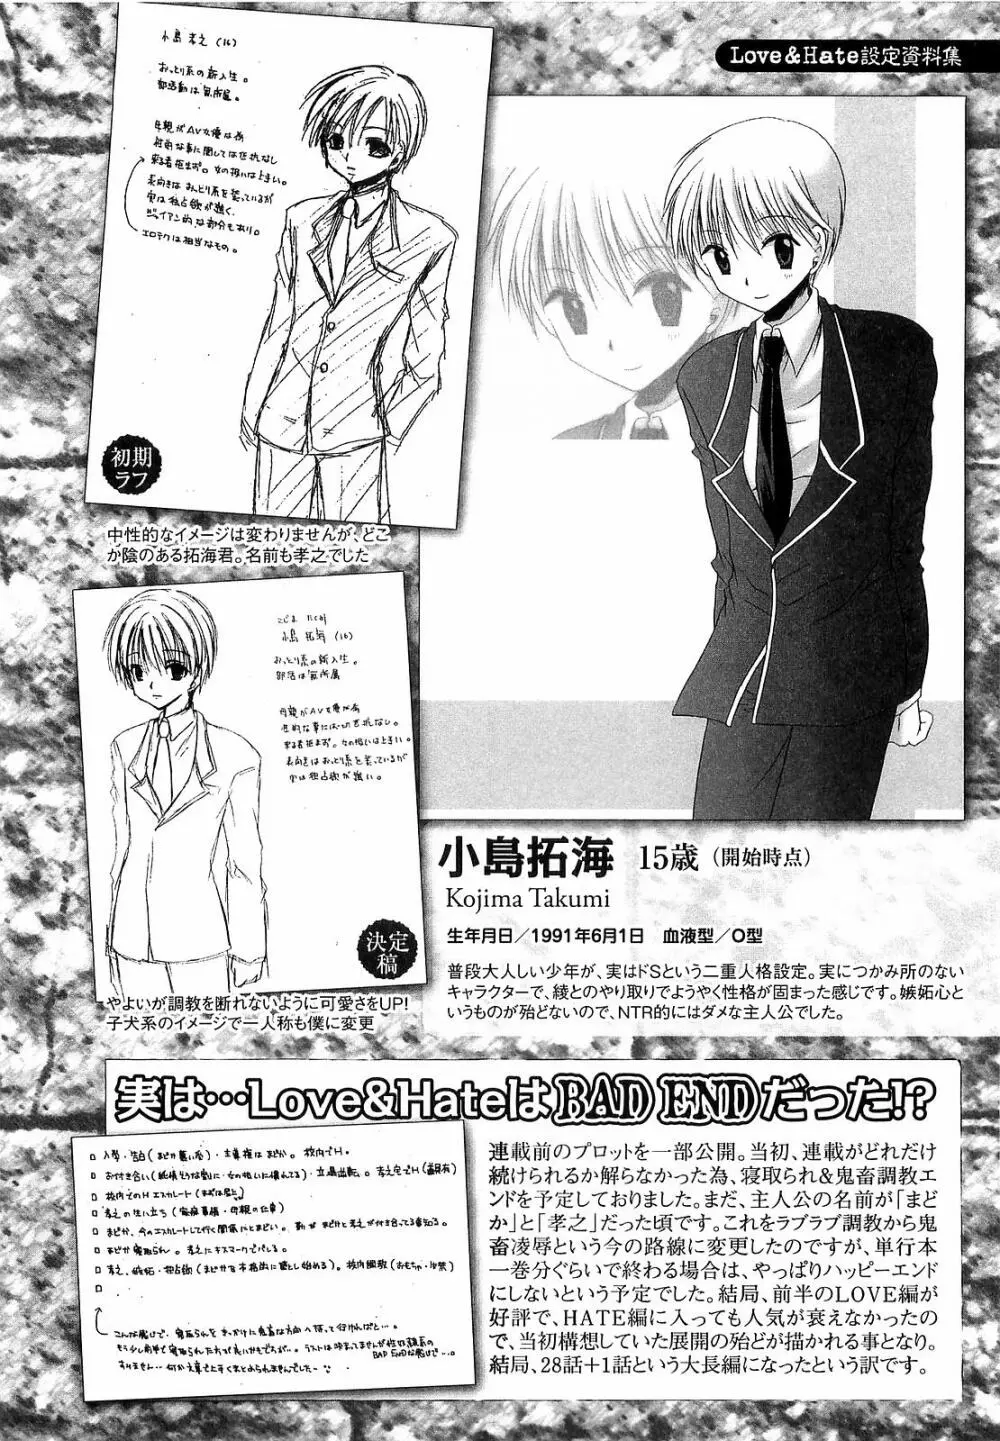 LOVE＆HATE3 ～ENGAGE～ L＆H SPECIAL ISSUE Page.32